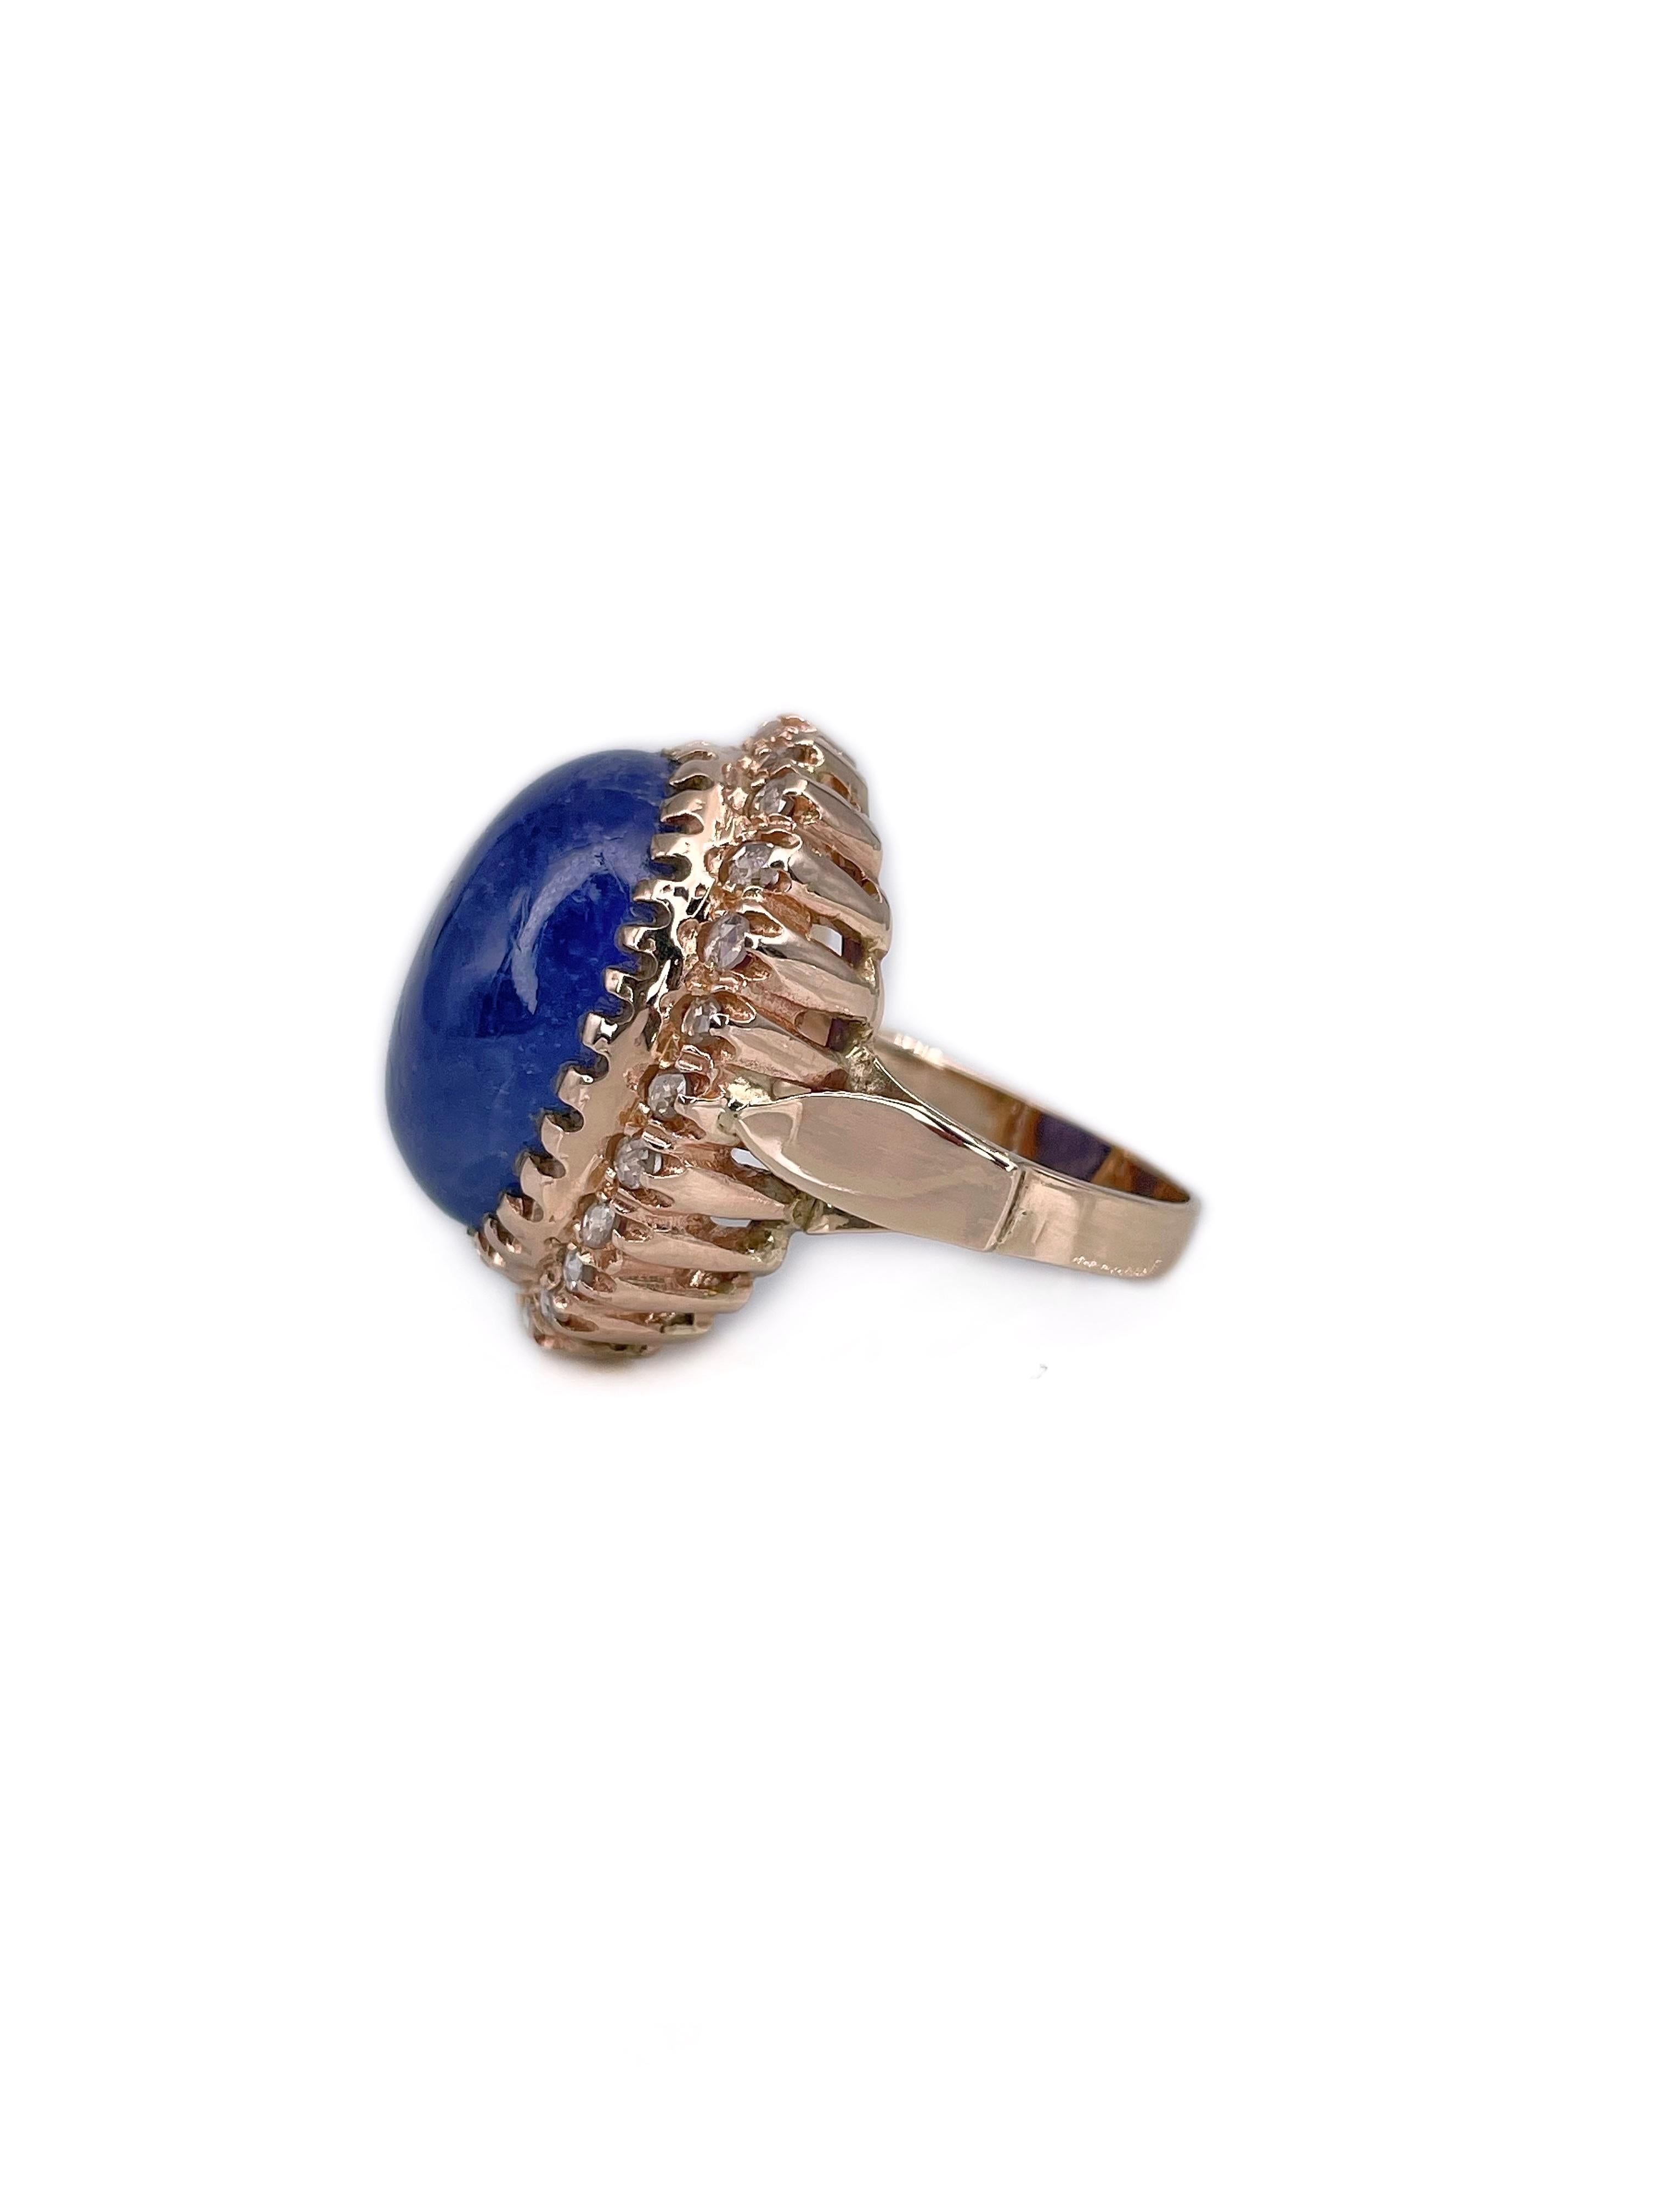 This is a vintage cocktail ring crafted in 9K gold. Circa 1960. 

The piece features:
- 1 tanzanite, oval, cabochon cut, 19.00ct, V 6/3, P3
- 24 diamonds, rose cut, TW 0.70ct, RW-STW, SI-P1

Weight: 12.22g 
Size: 17.5 (US 7)

IMPORTANT: please ask